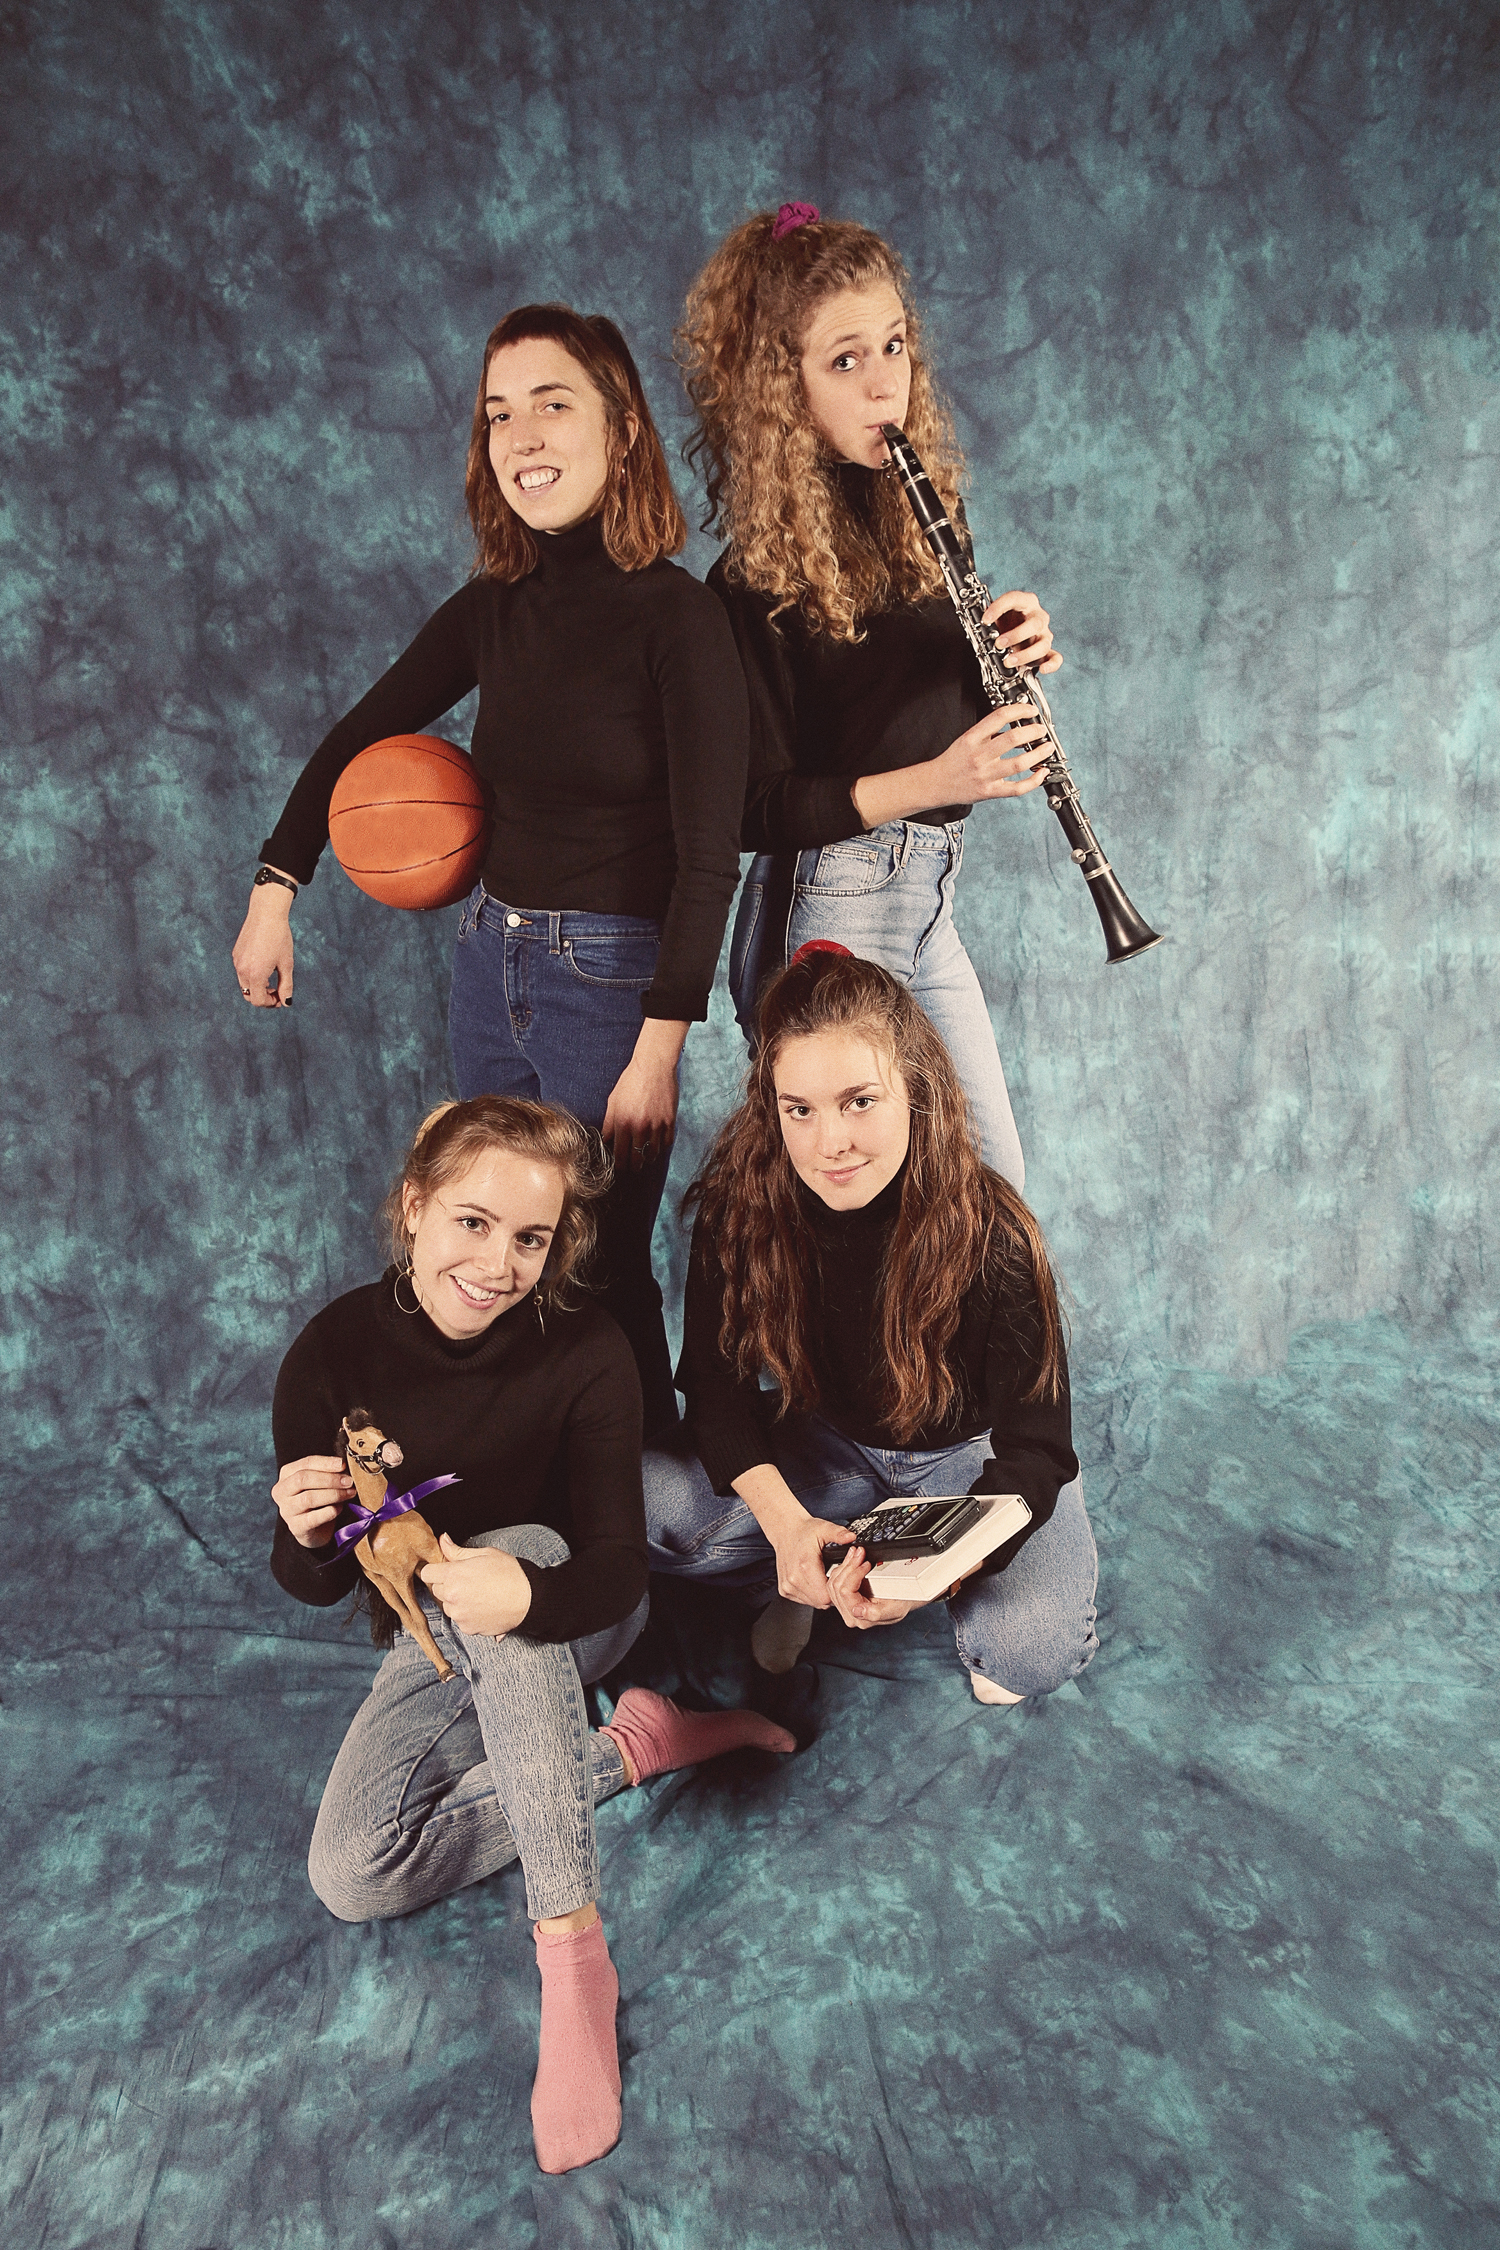 Starting the year off with a bang, irreverent rockers Chastity Belt announced